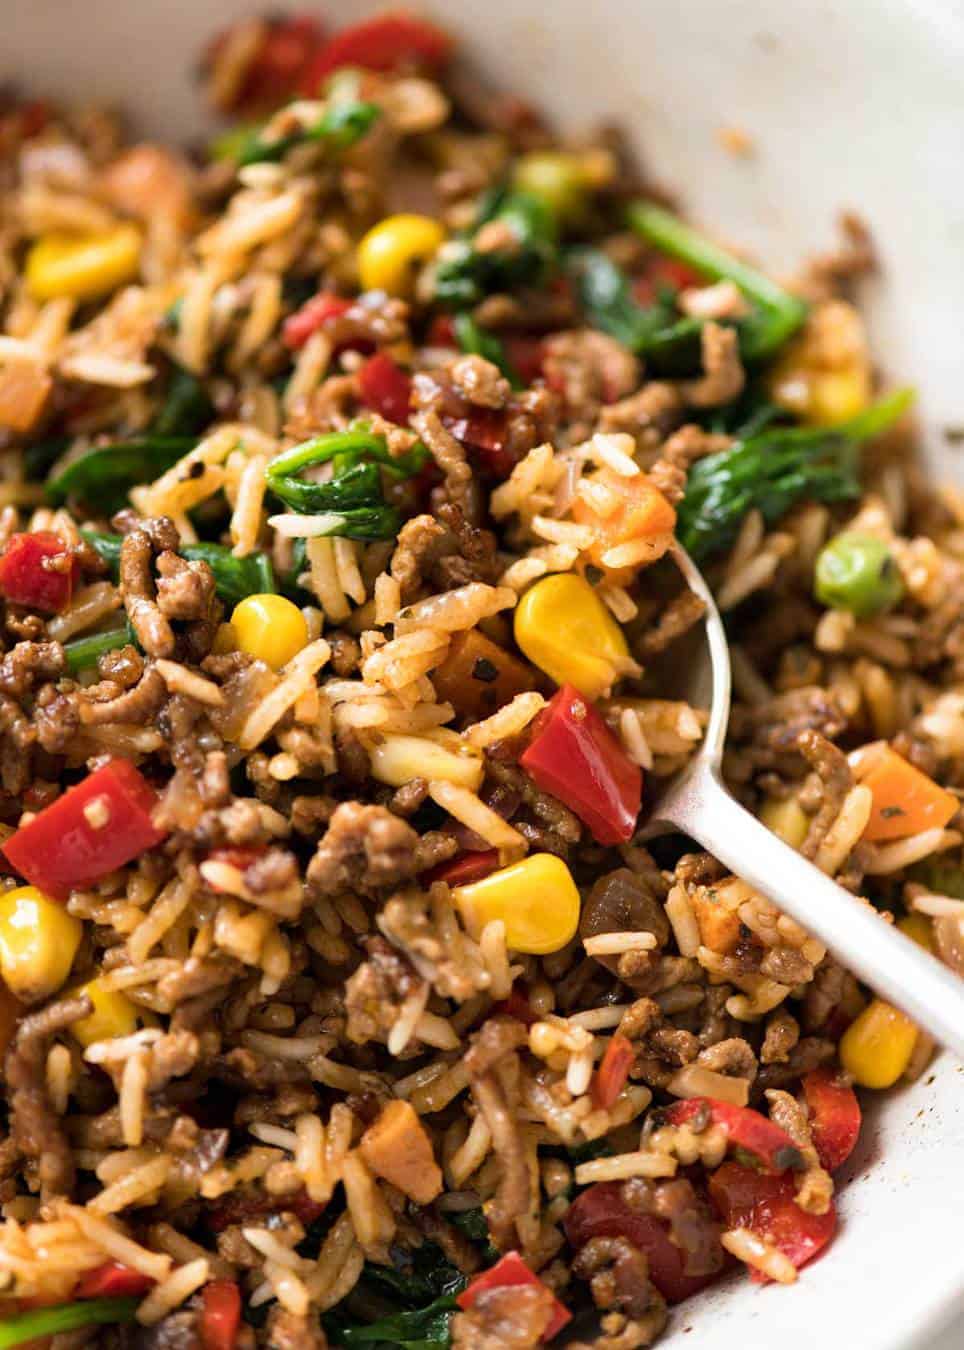 Beef and Rice with Veggies | RecipeTin Eats